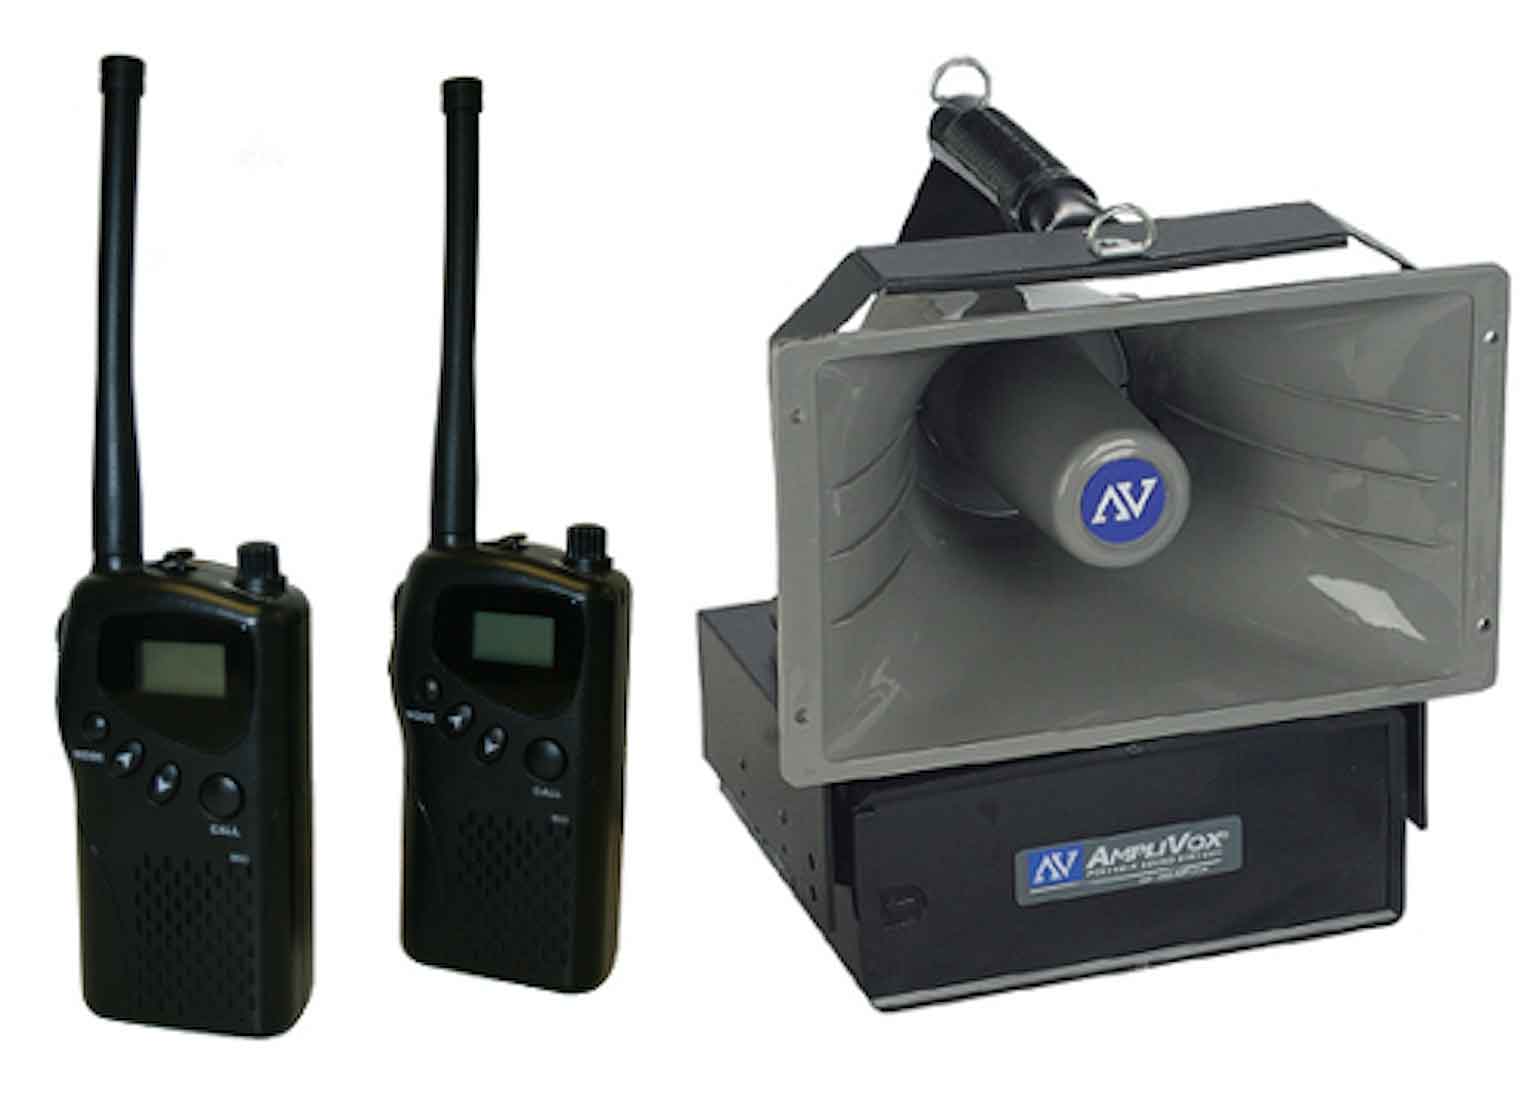 AmpliVox SW6210 Radio Hailer, a portable remote loudspeaker system connected by two-way MURS radios for centralized communication over large areas